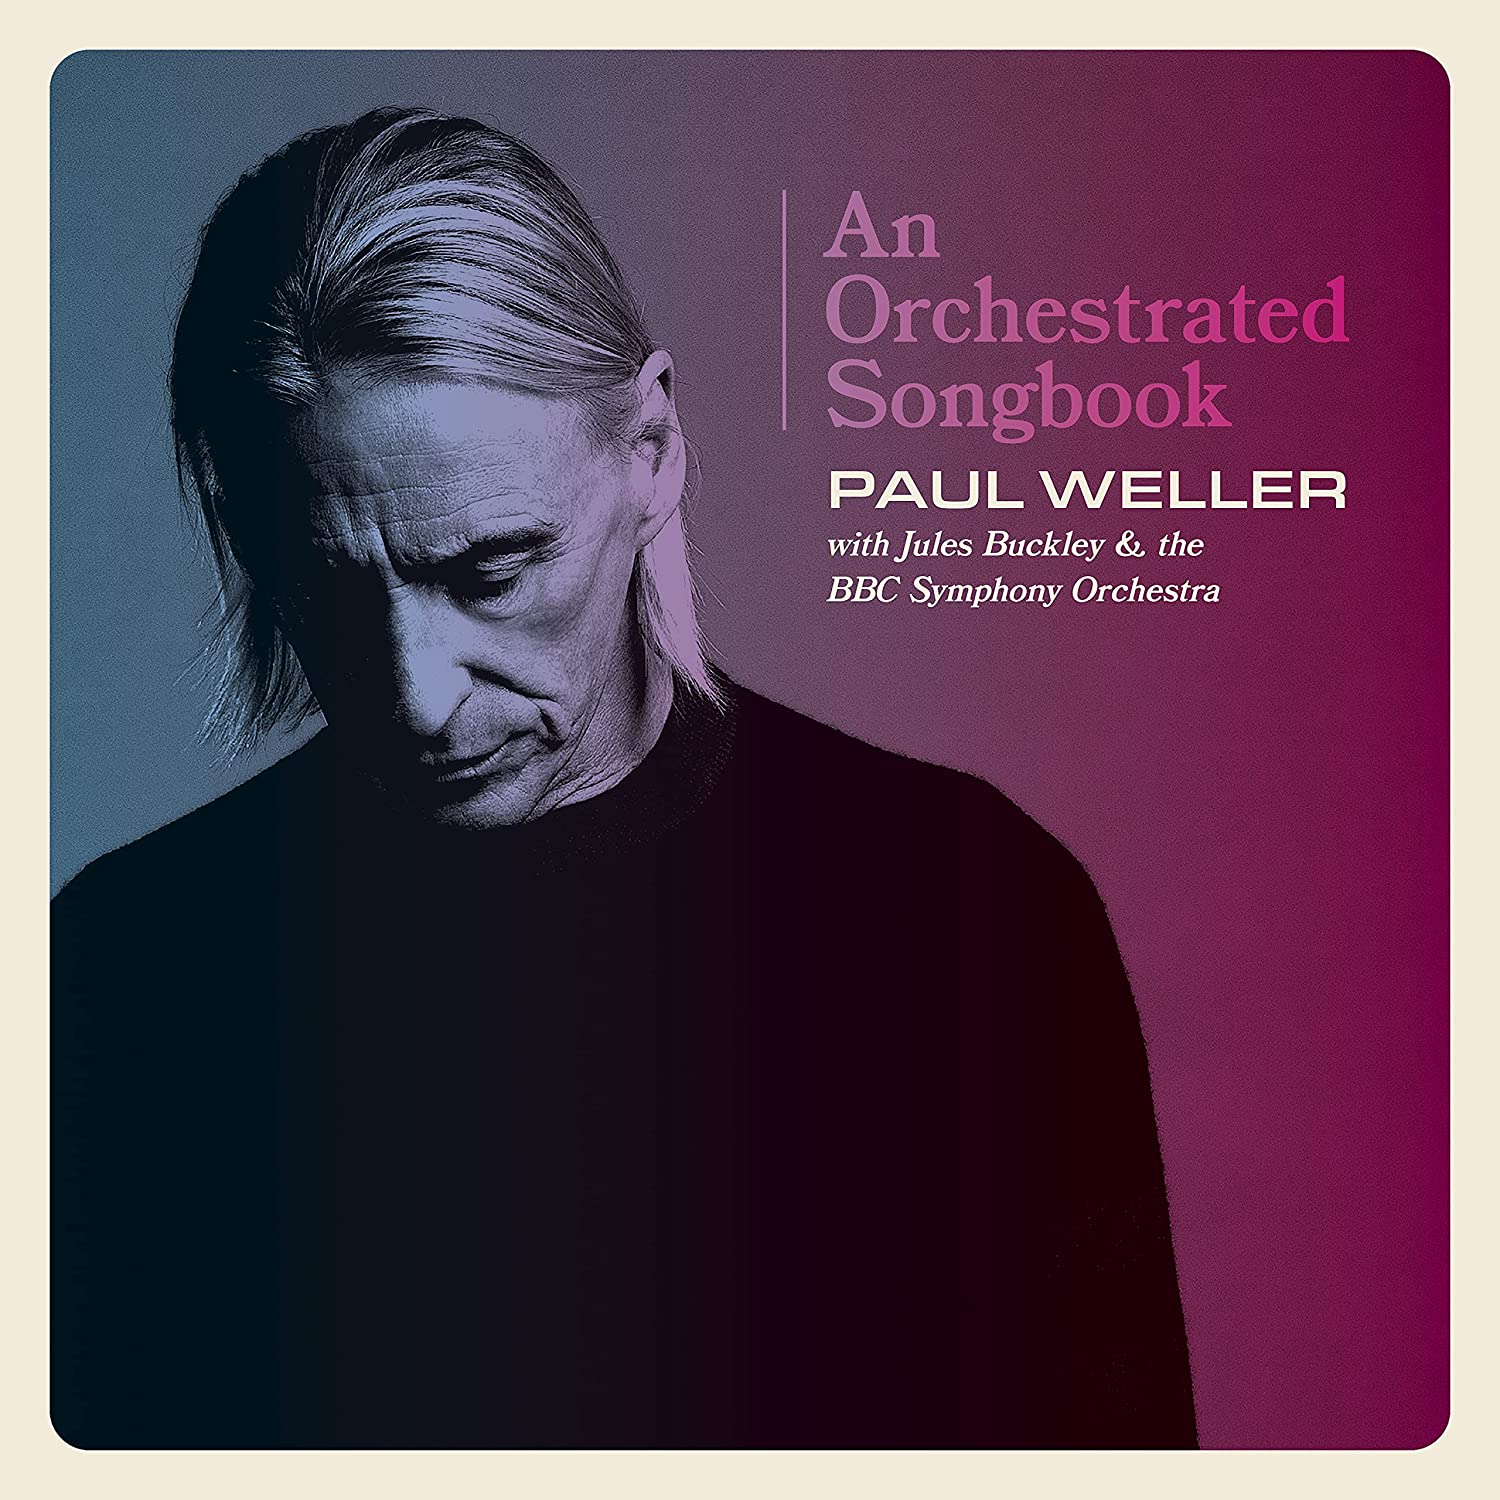 Paul Weller 'an orchestrated songbook'